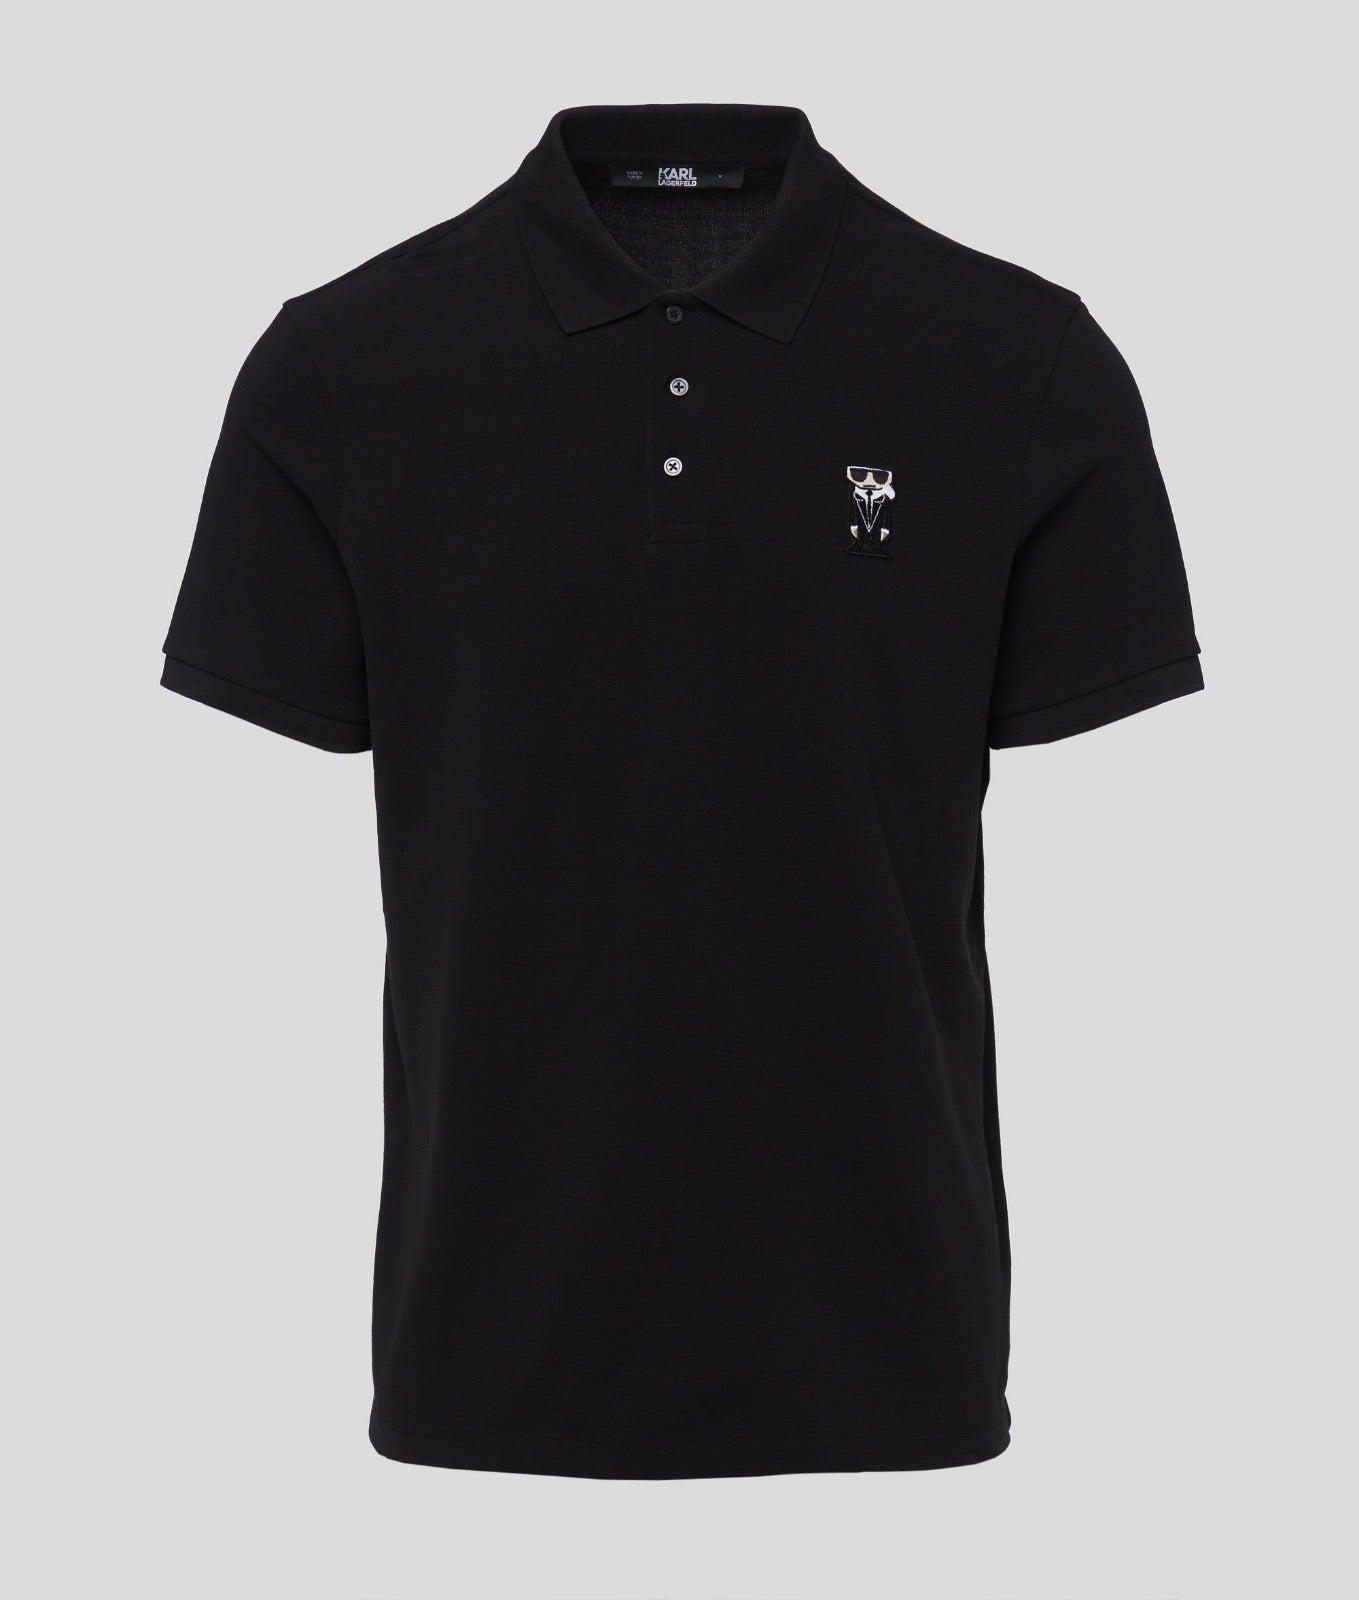 Karl Lagerfeld Kocktail Patch Polo T-Shirt